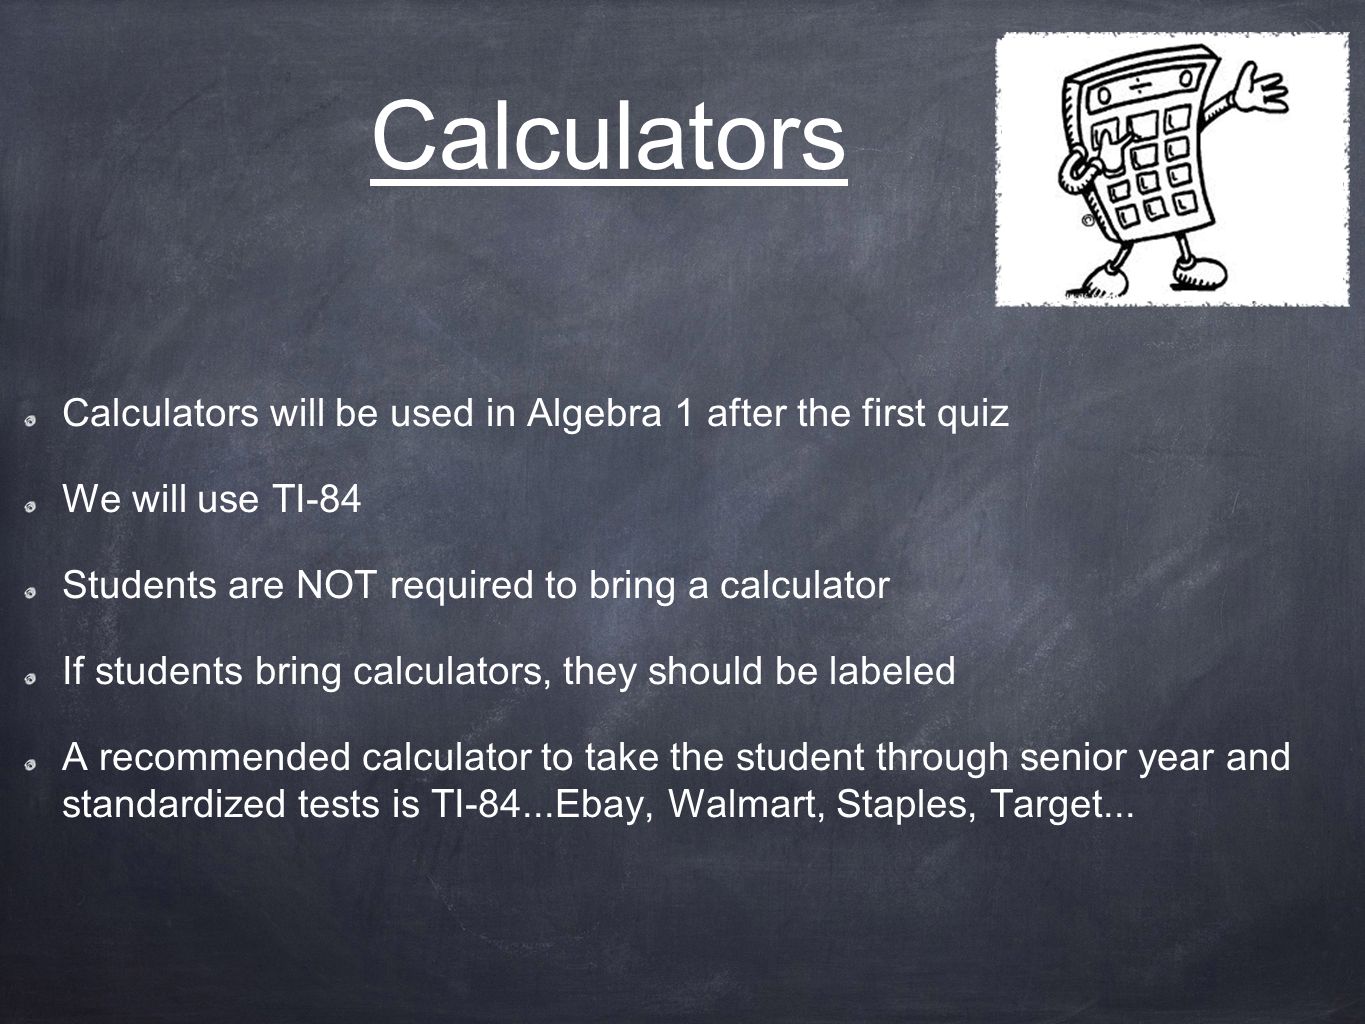 Calculators Calculators will be used in Algebra 1 after the first quiz We will use TI-84 Students are NOT required to bring a calculator If students bring calculators, they should be labeled A recommended calculator to take the student through senior year and standardized tests is TI-84...Ebay, Walmart, Staples, Target...